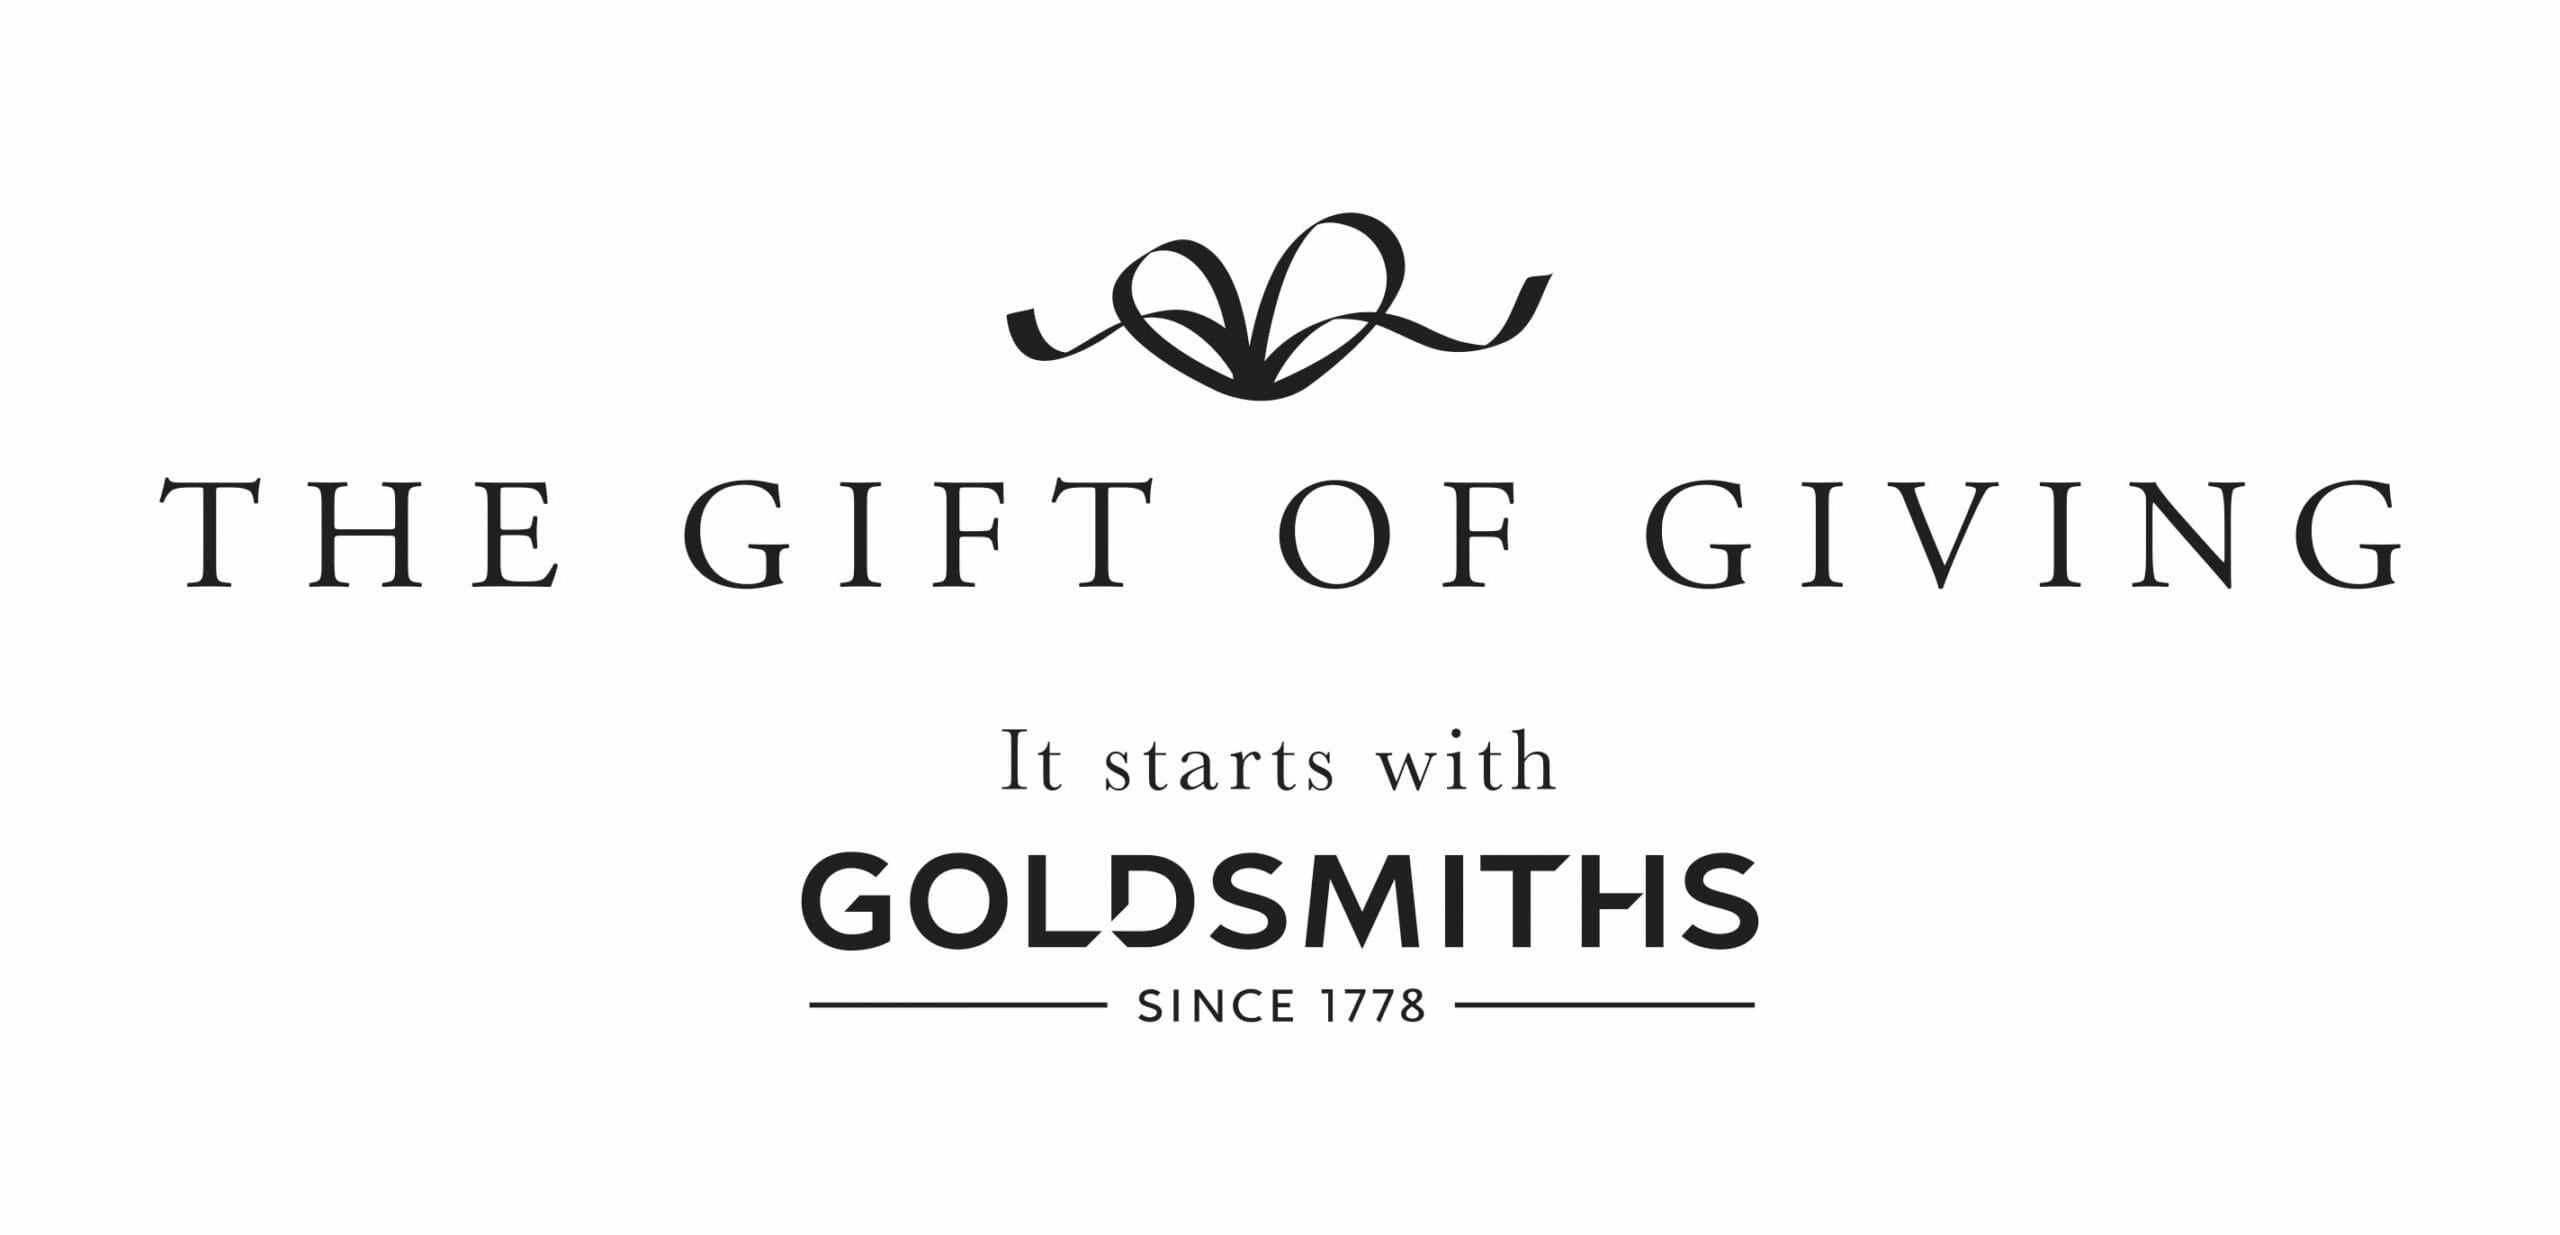 Our video campaign to help Goldsmiths this Christmas